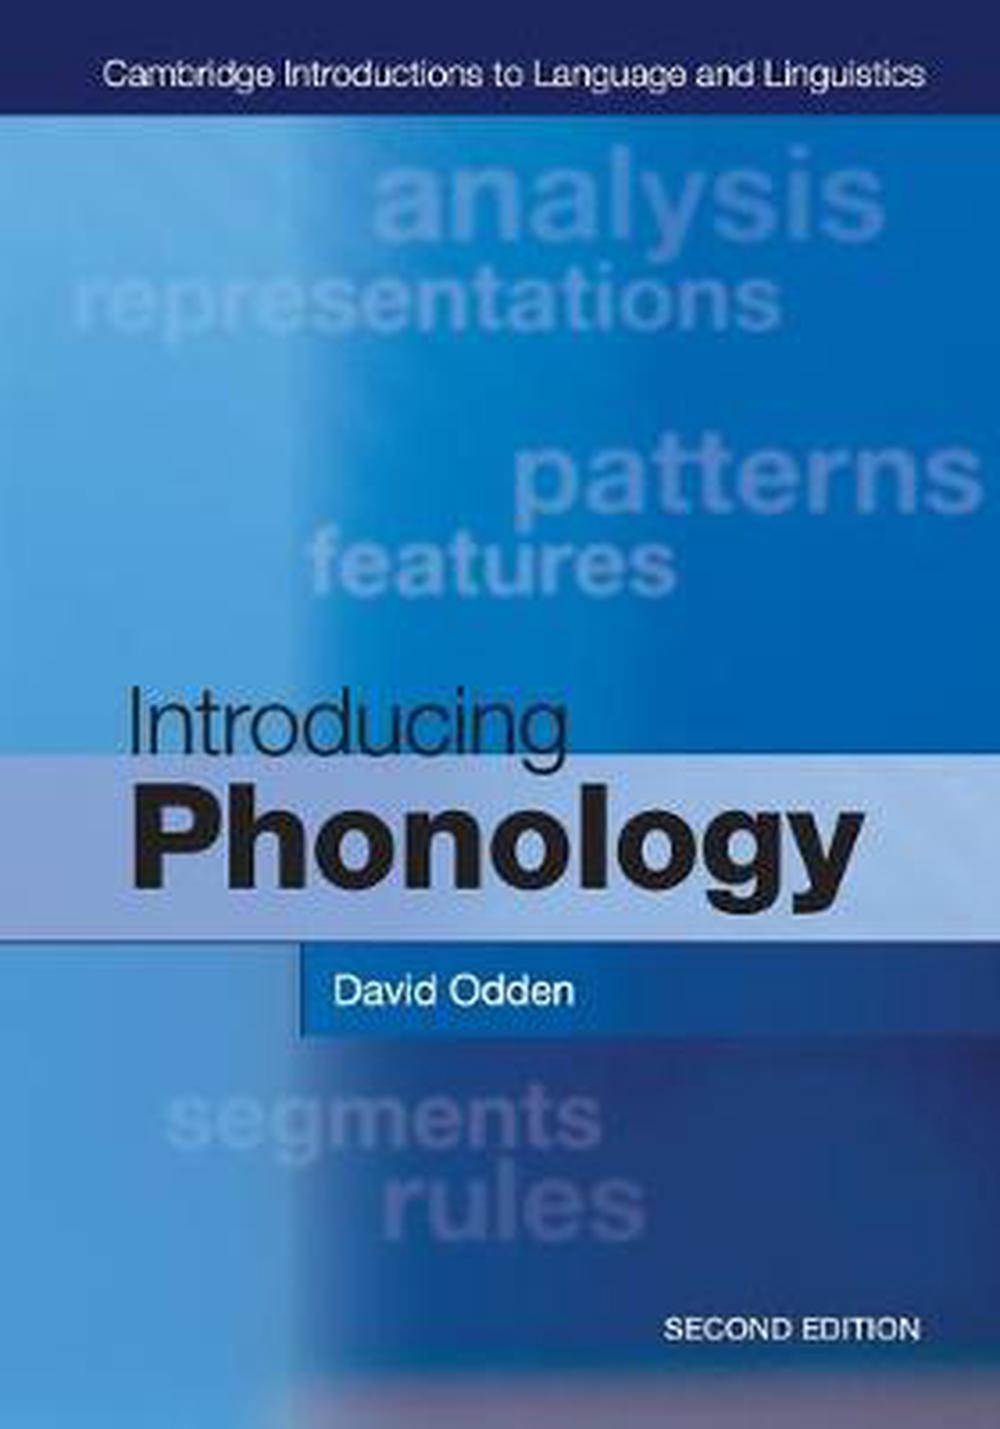 Odden,　David　9781107627970　Buy　by　Edition　The　Nile　Introducing　at　Paperback,　Phonology,　2nd　online